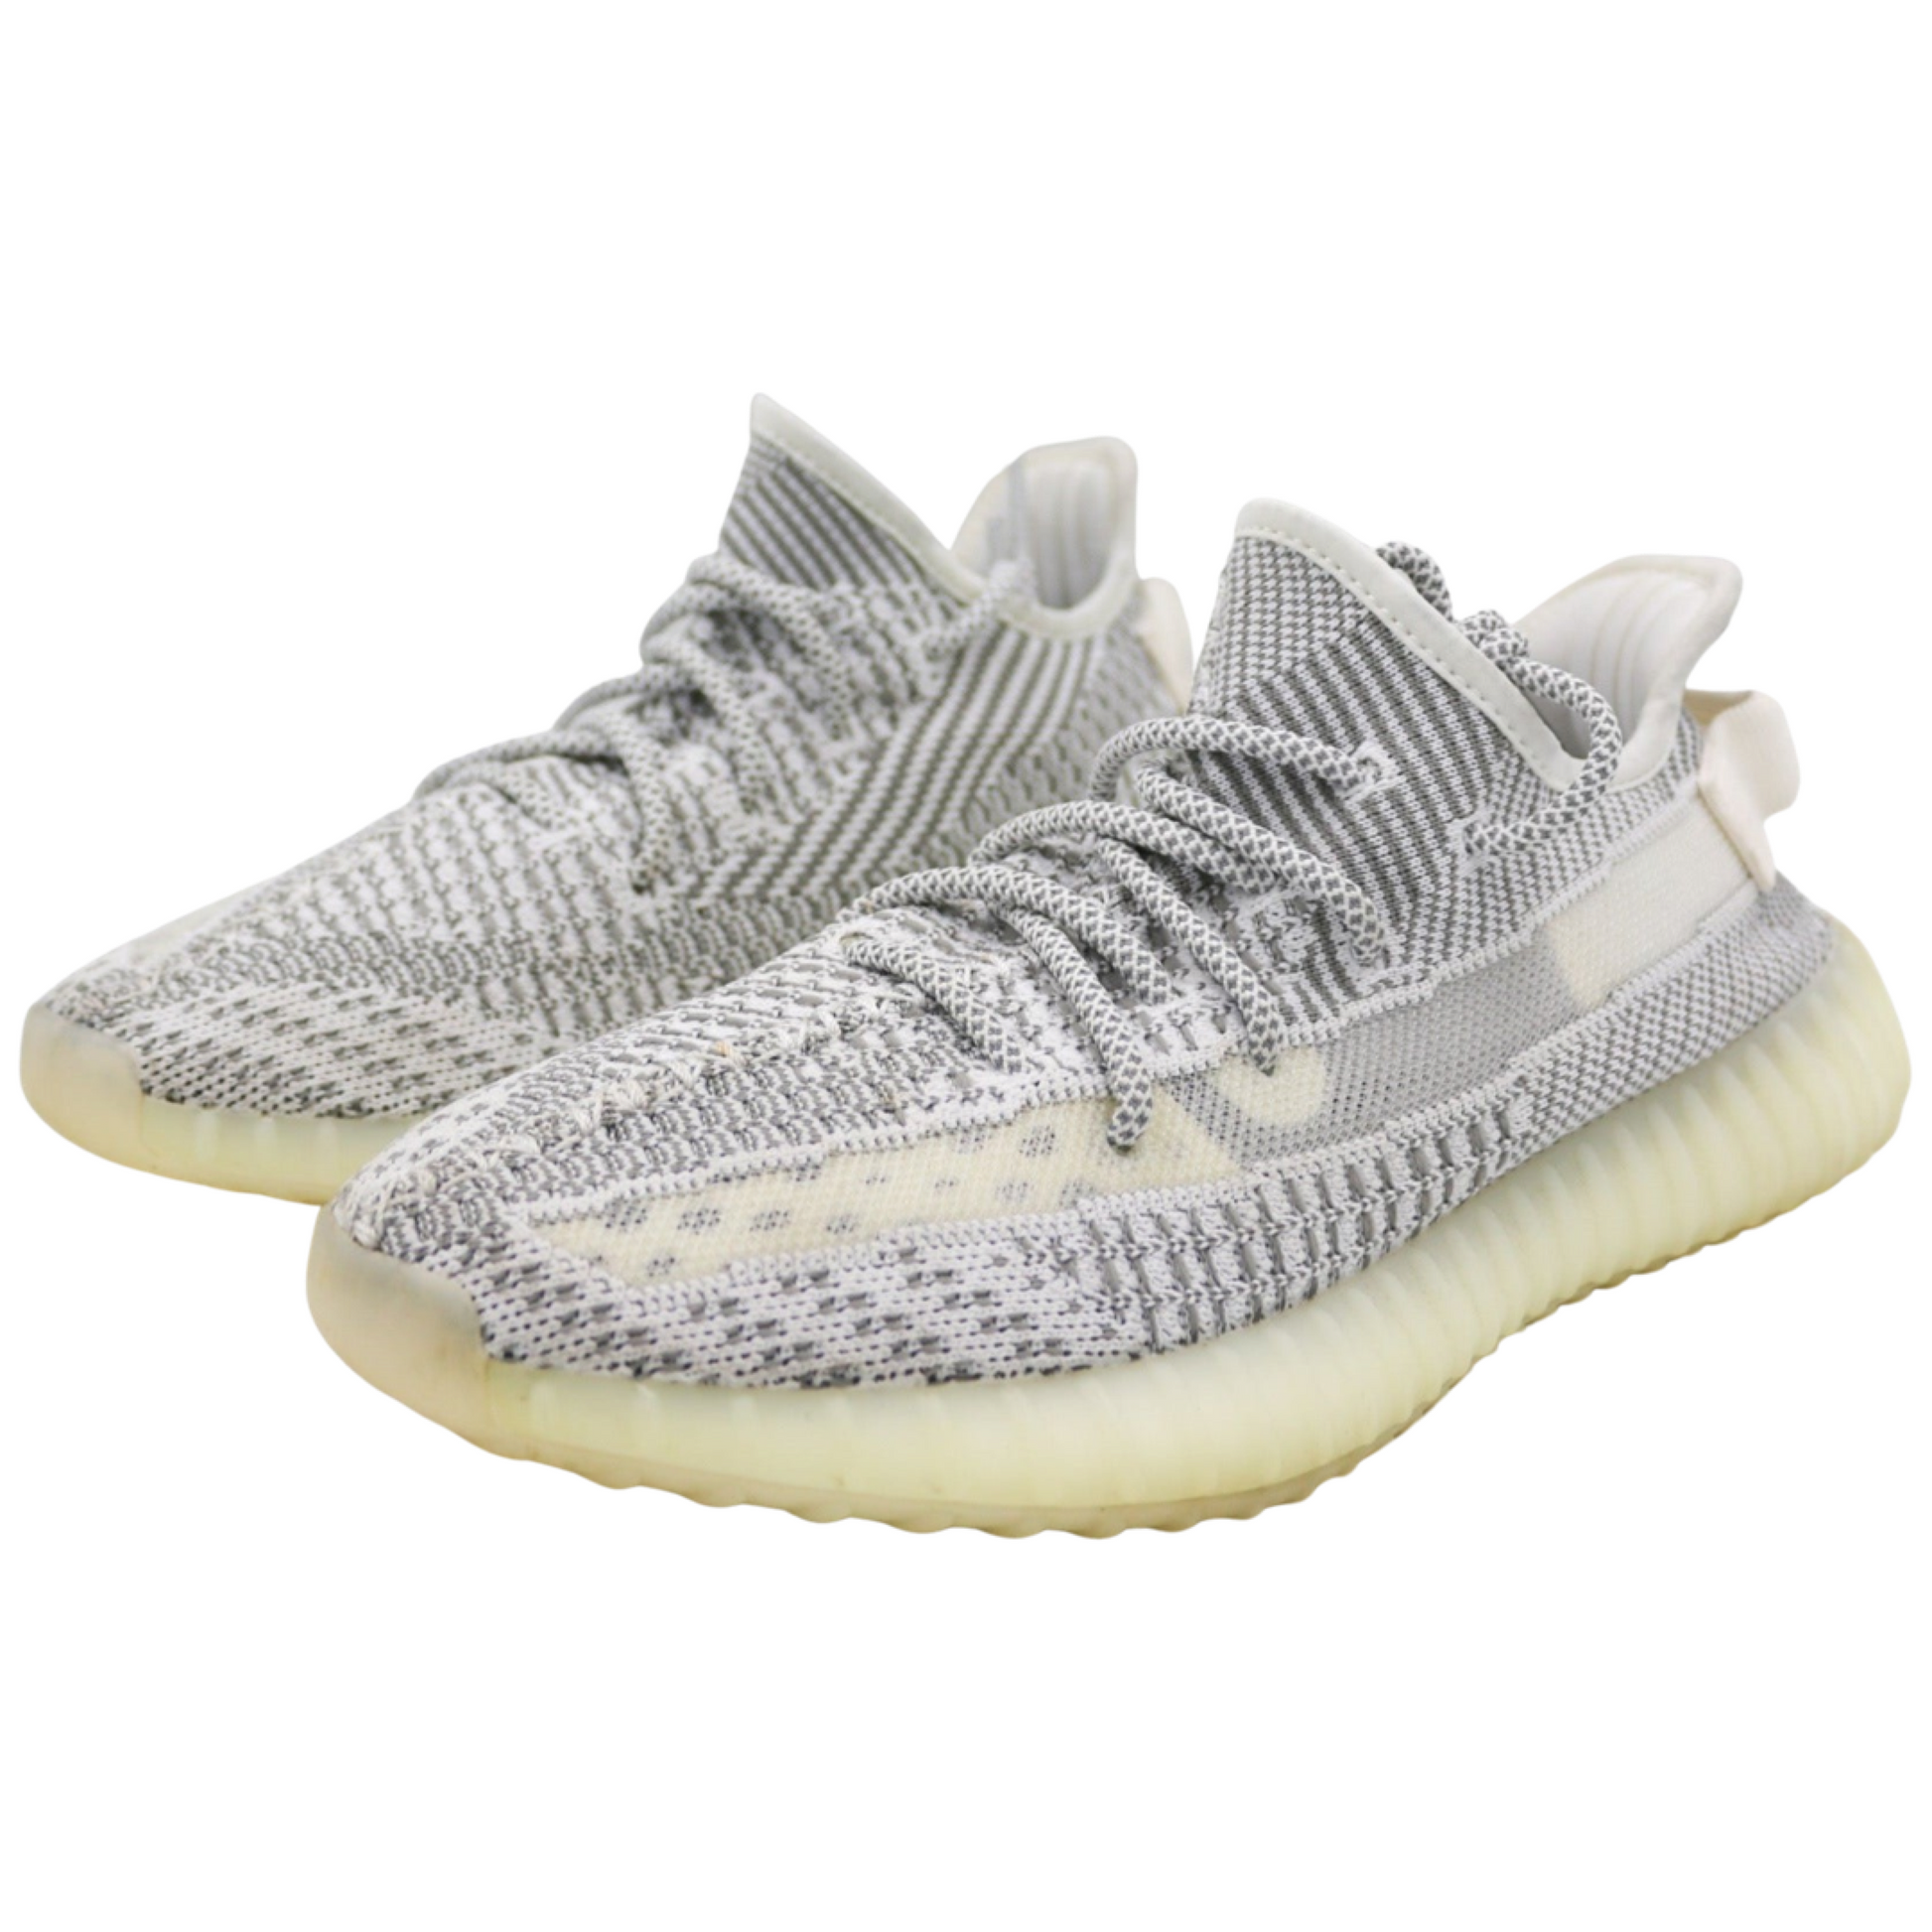 Yeezy Boost 350 V2 Static Non Reflective –